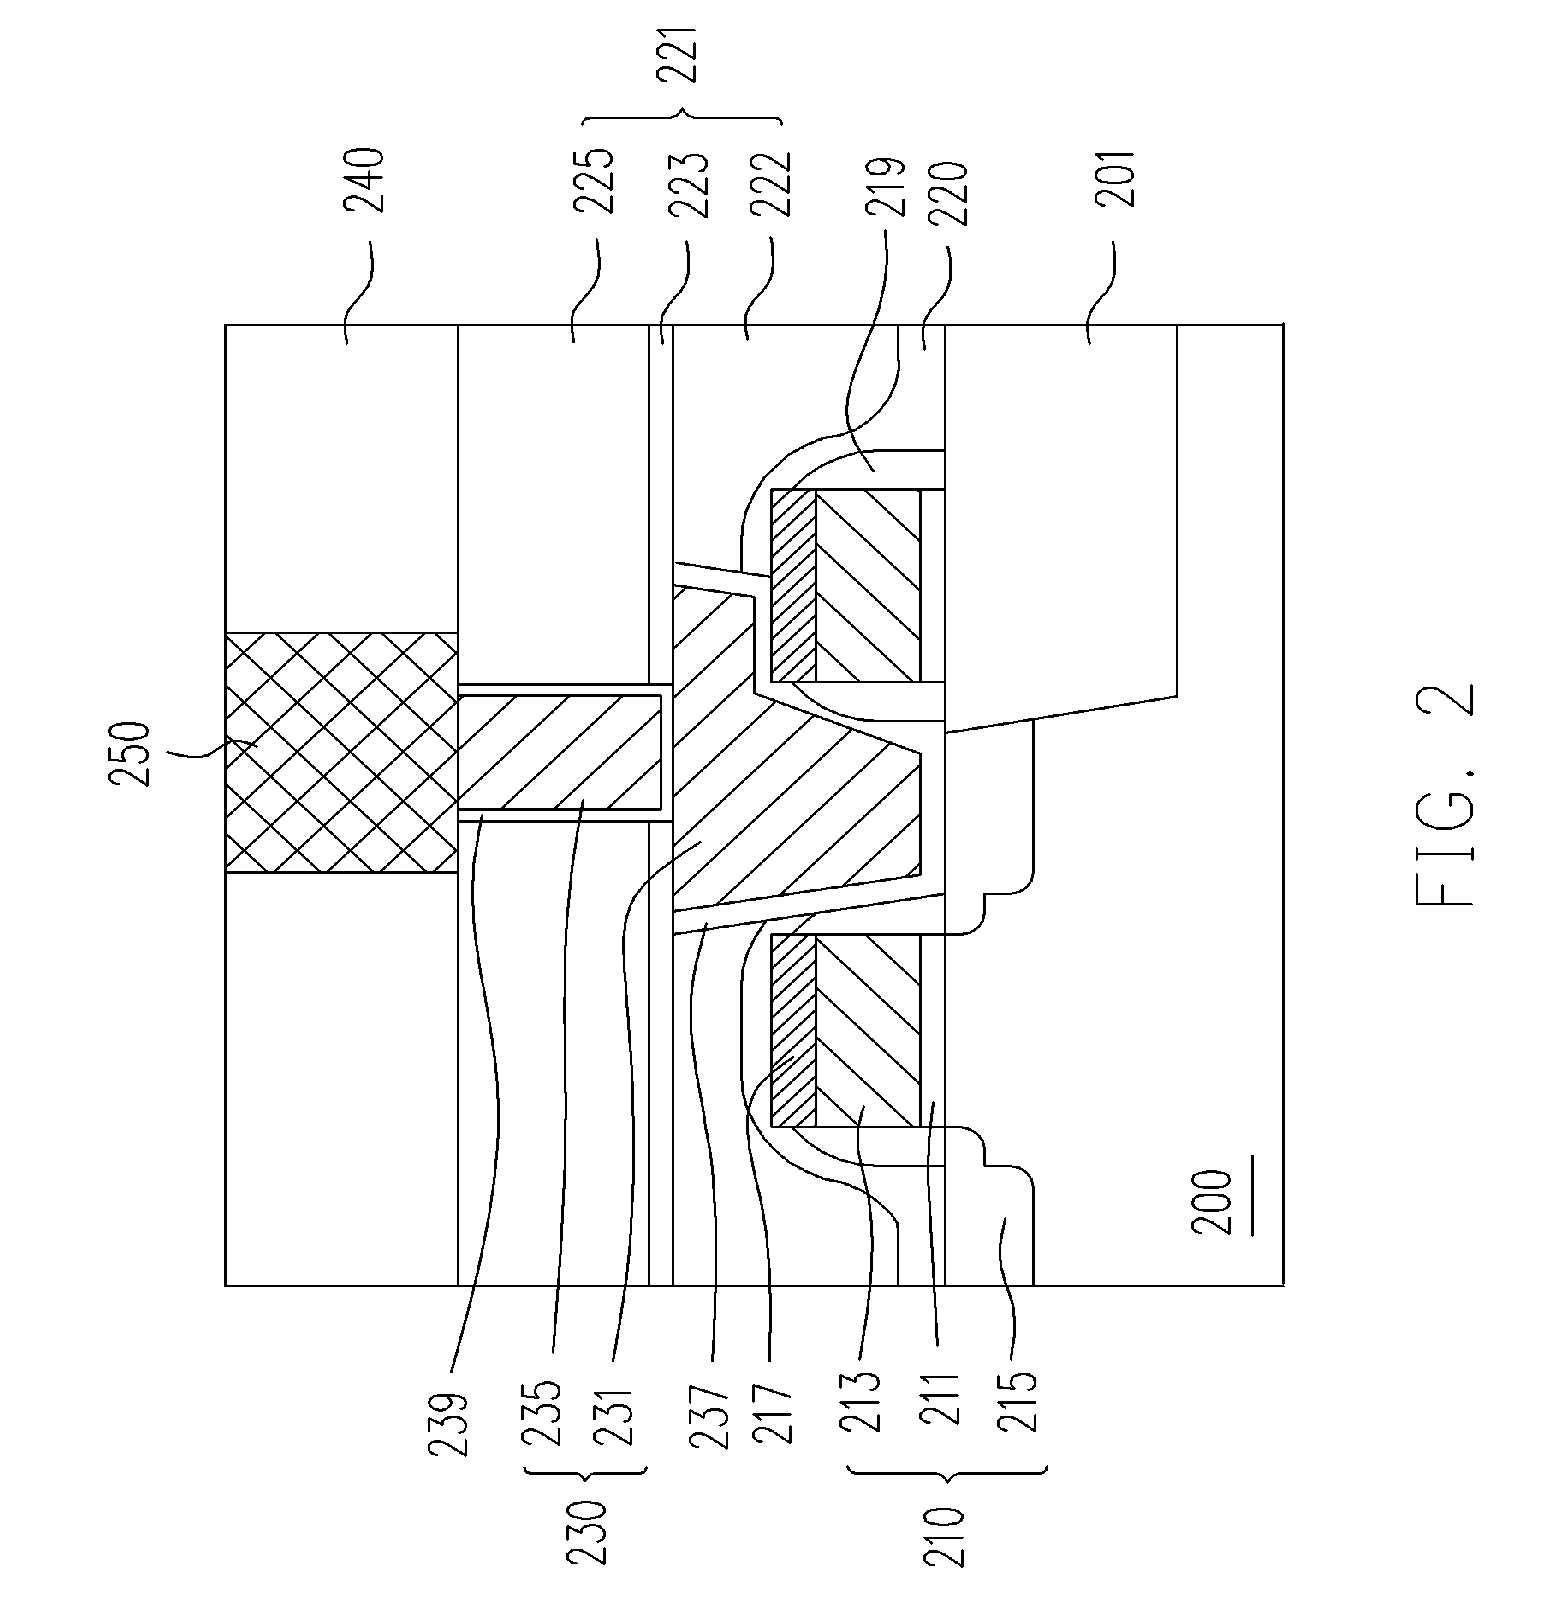 Fabricating method of an interconnect structure